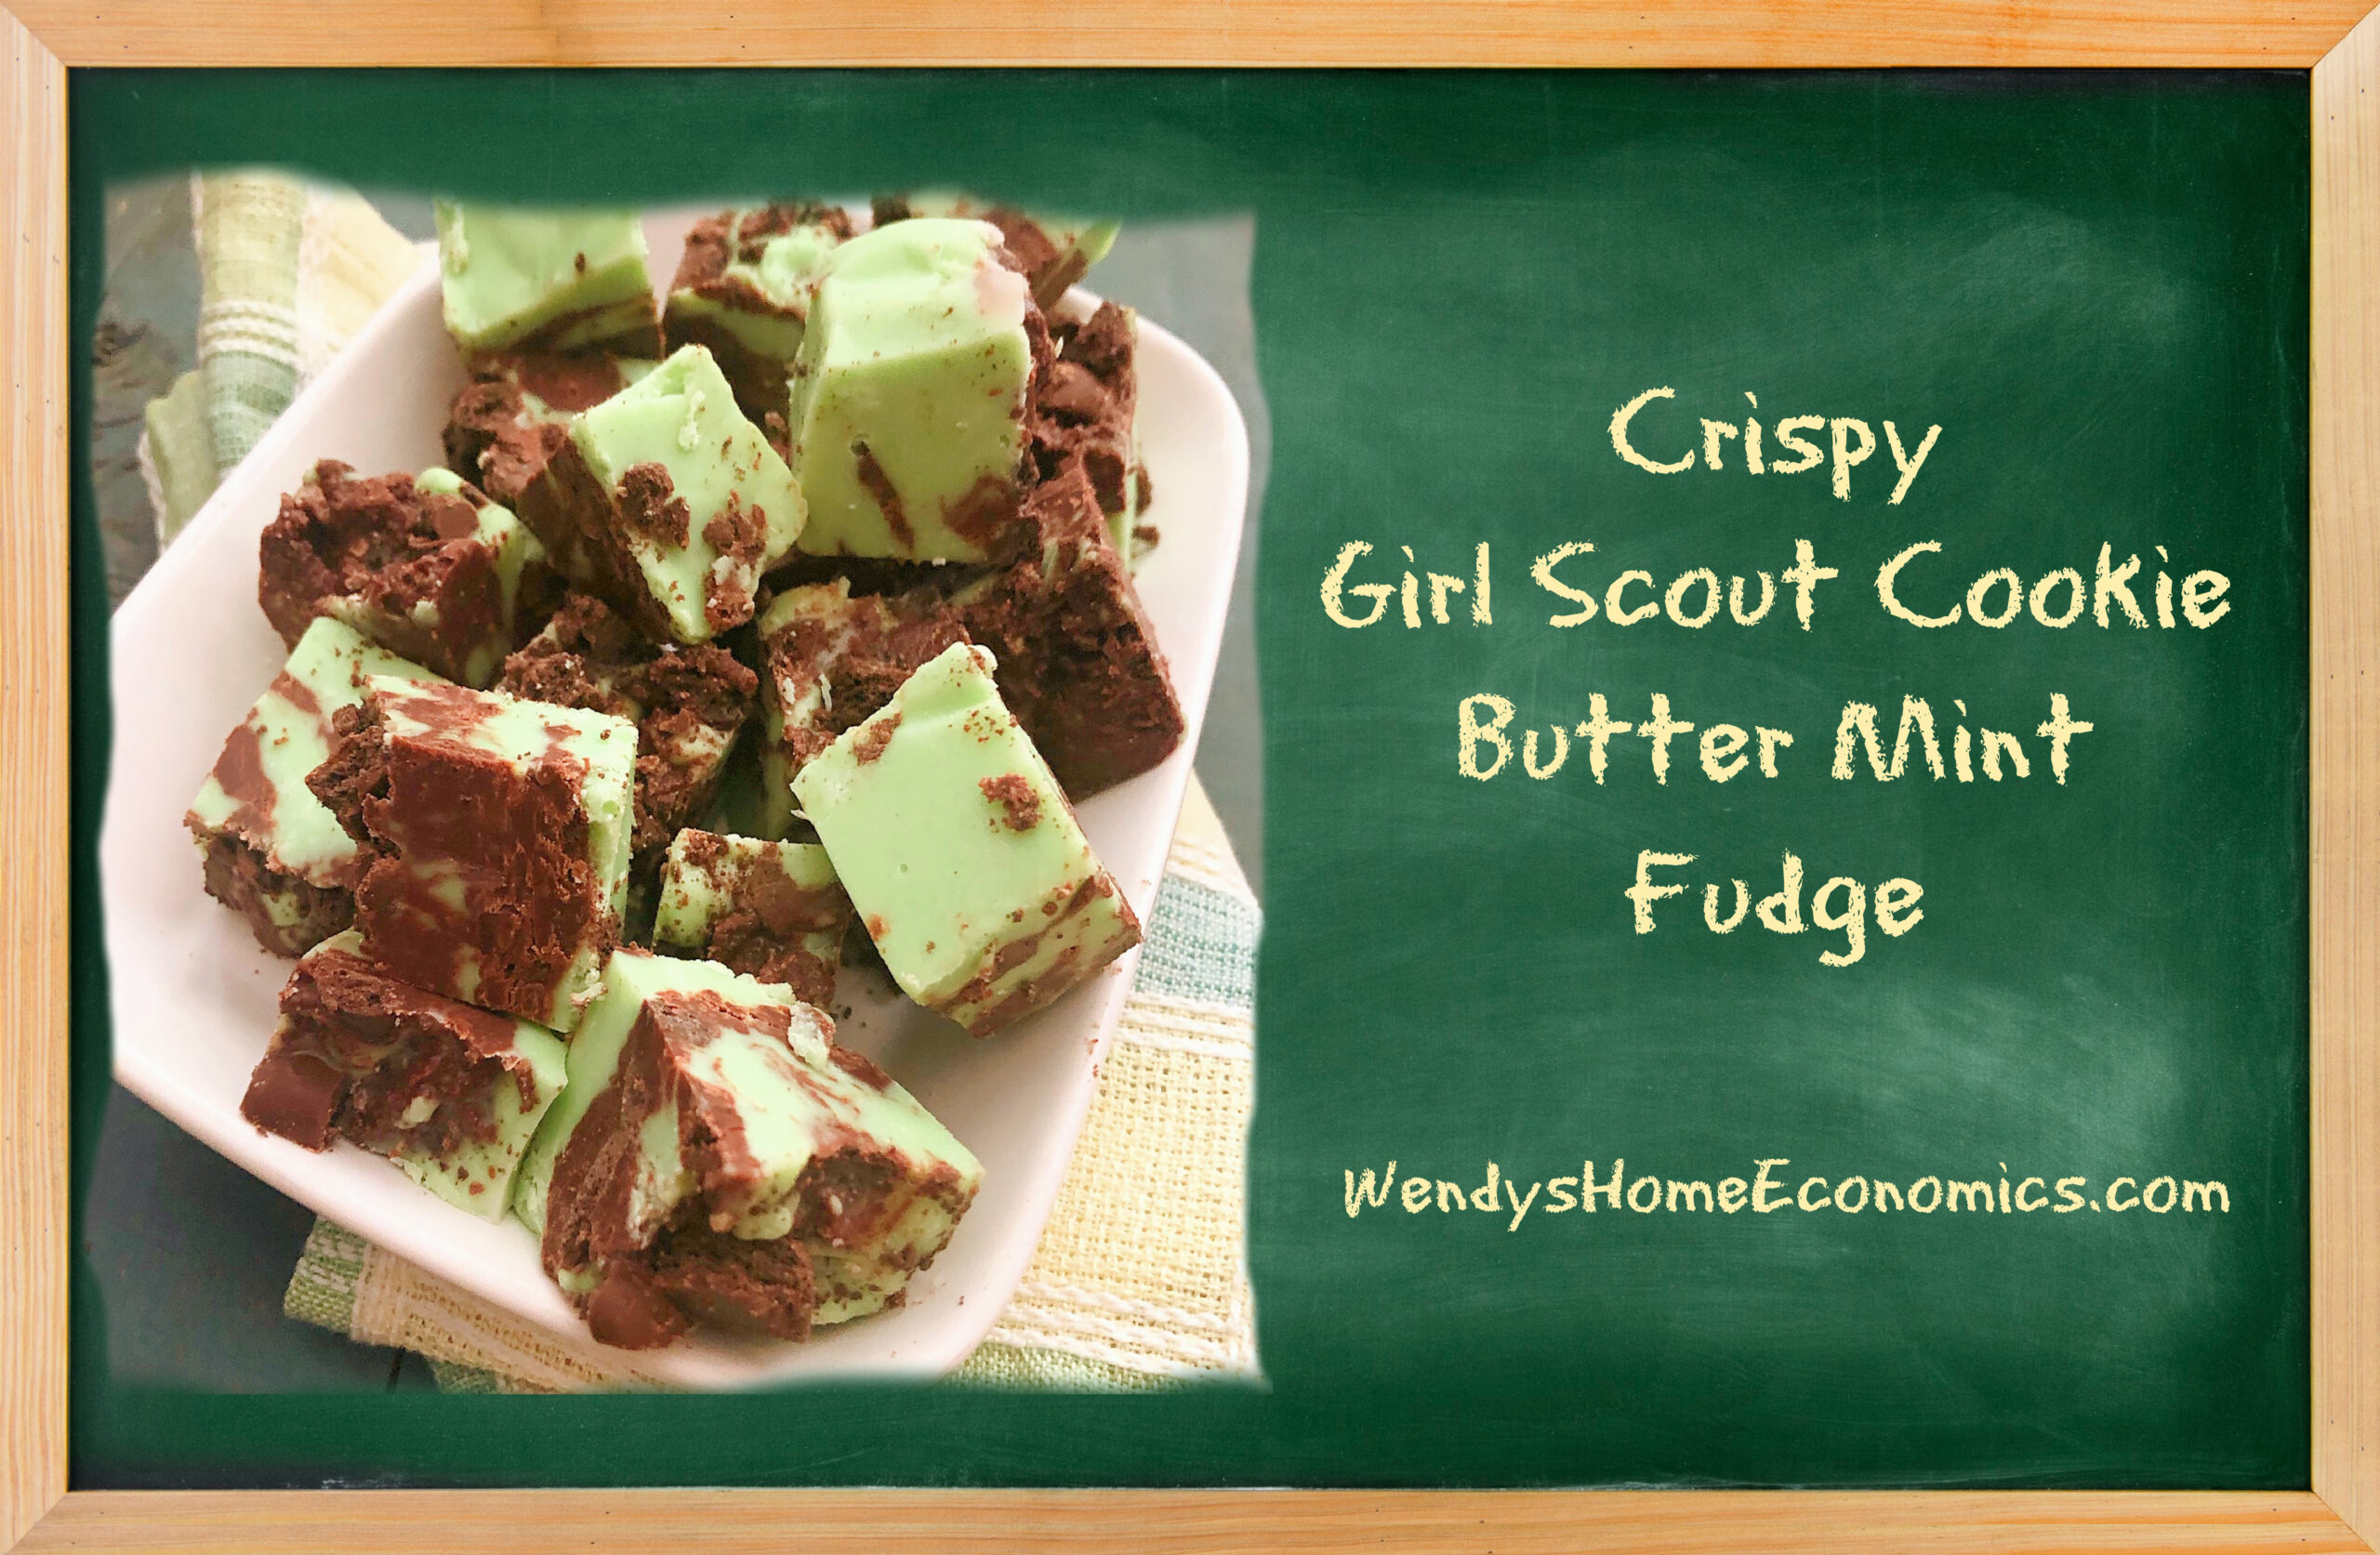 image of crispy girl scout cookie chocolate mint fudge